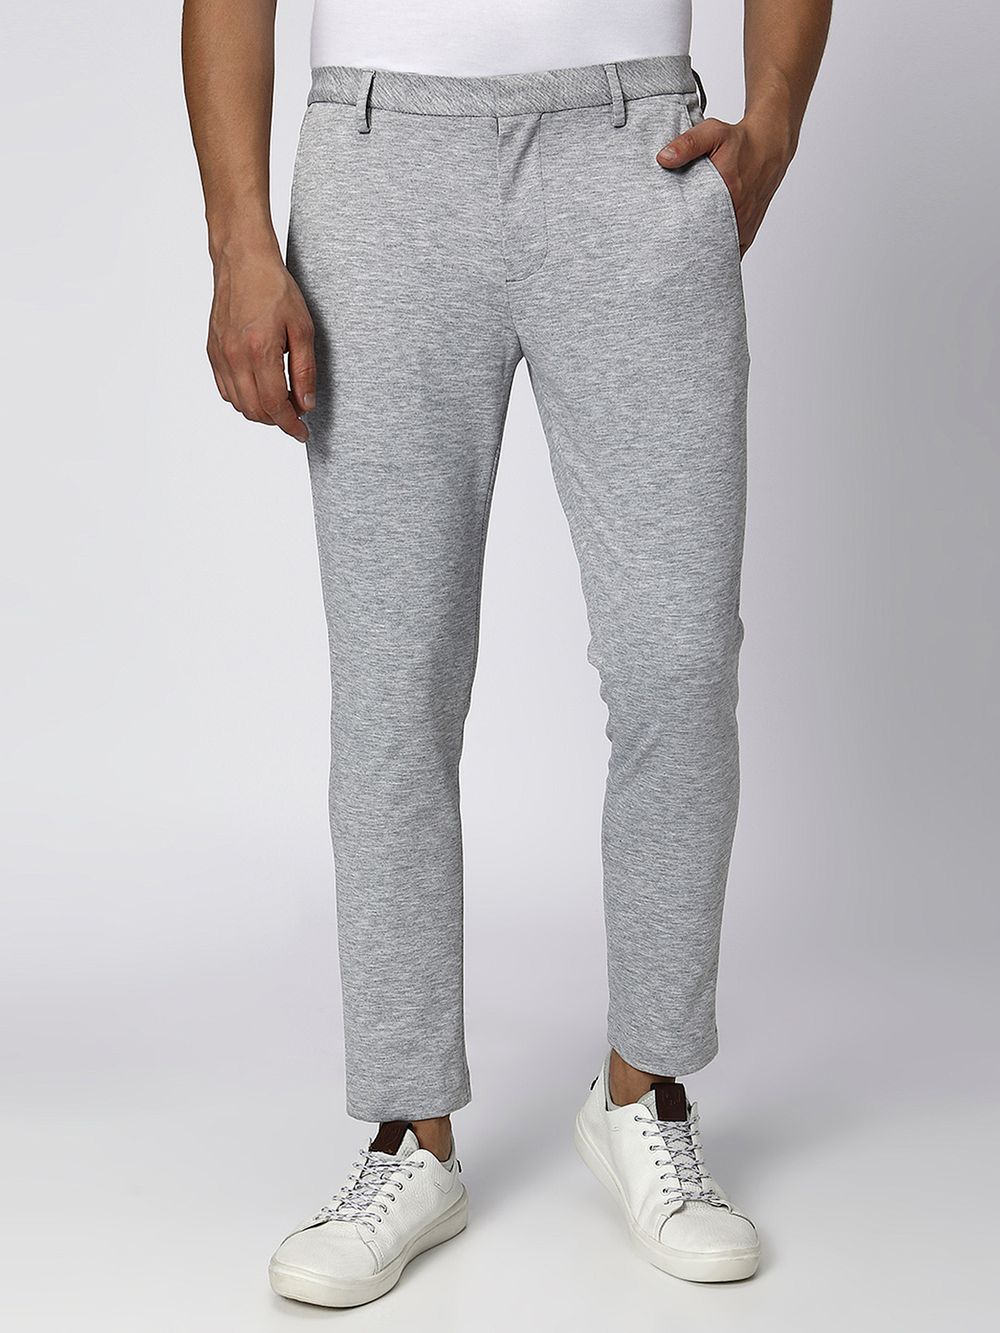 Grey Ankle Length Stretch Chinos